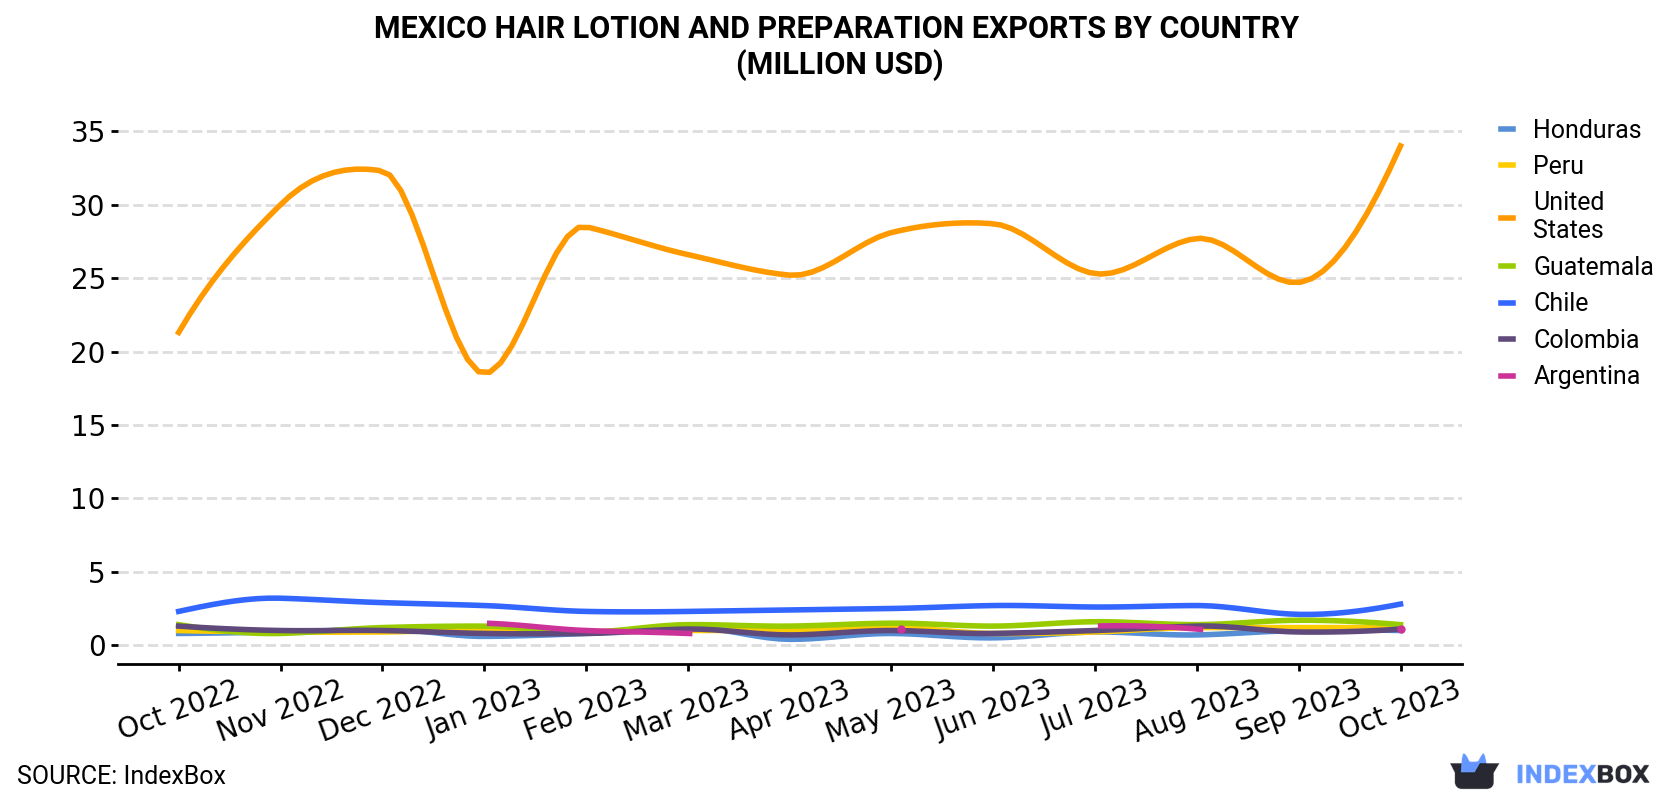 Mexico Hair Lotion and Preparation Exports By Country (Million USD)